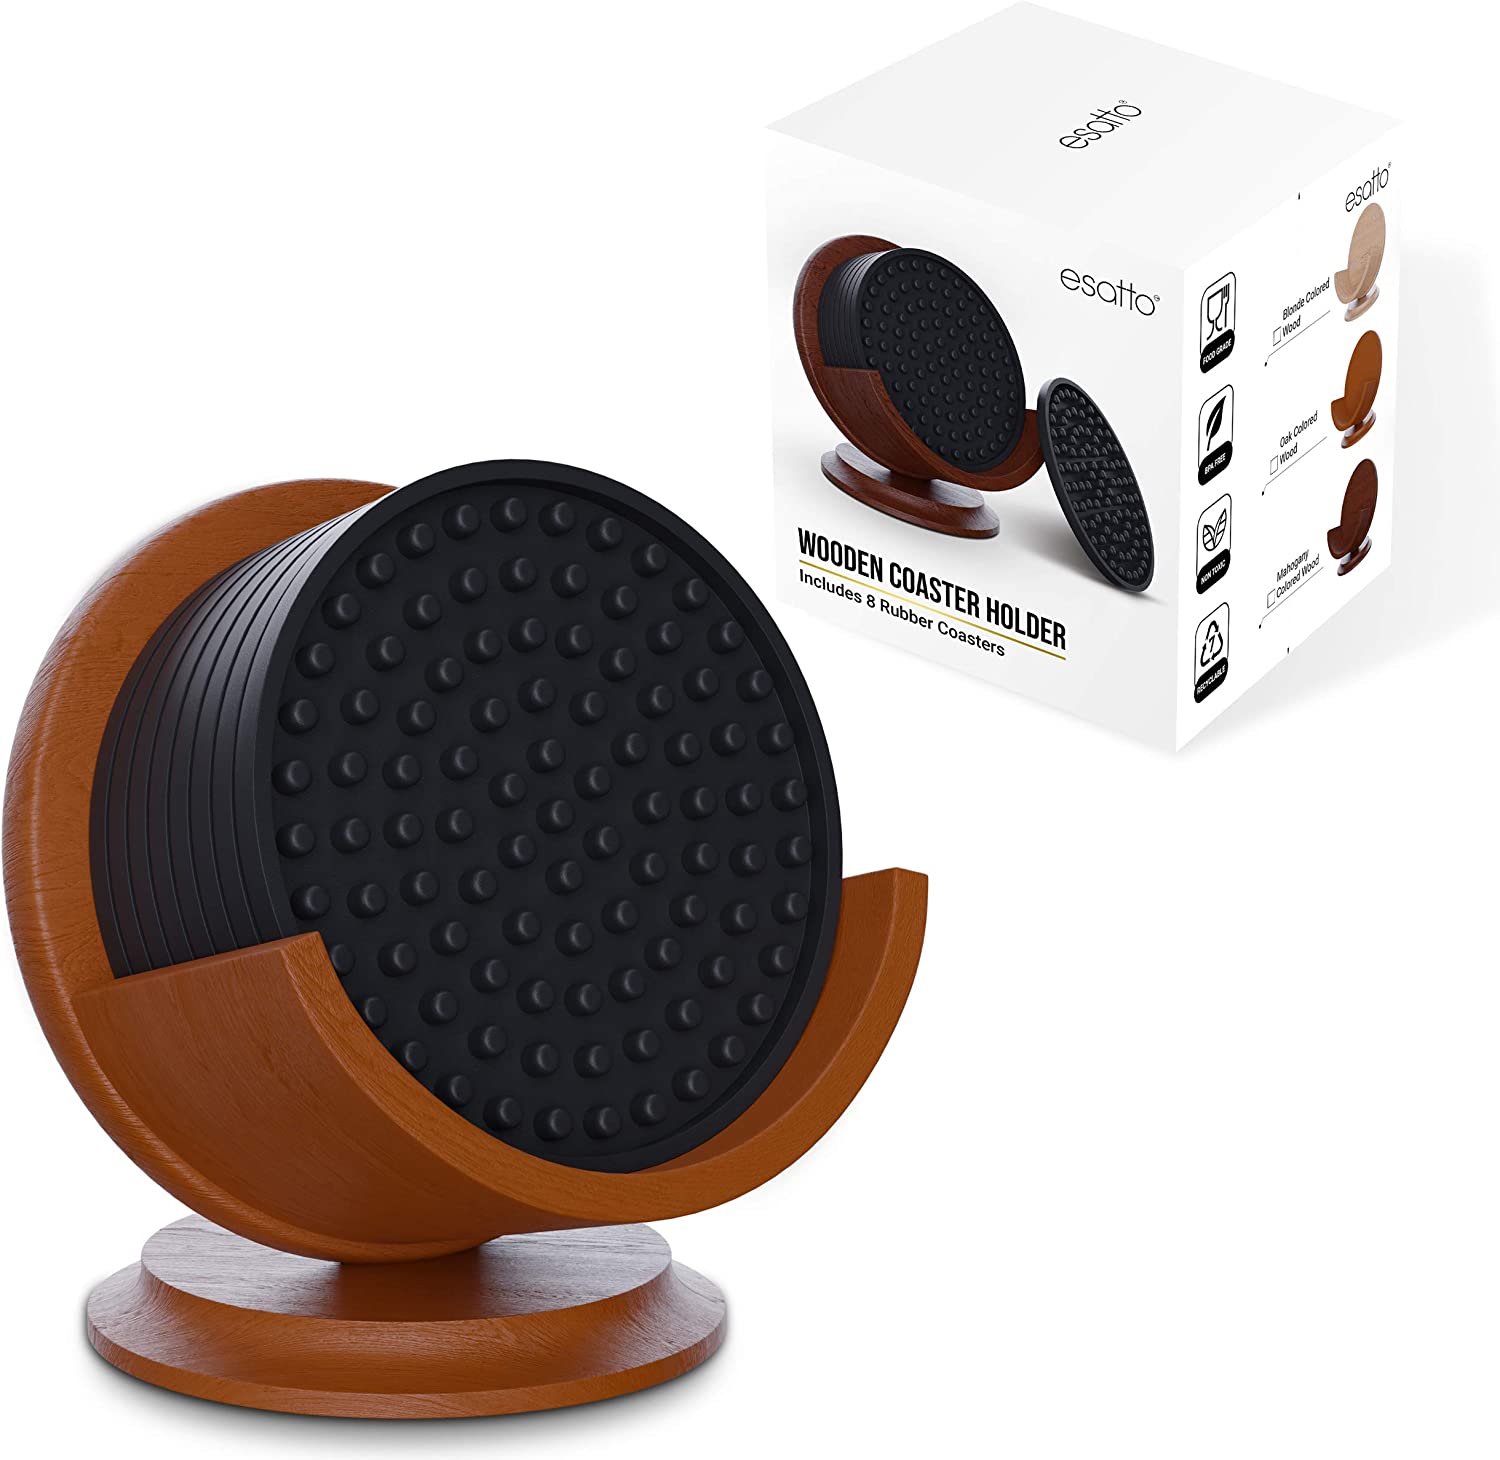 Featured image for “Esatto Bar Products Smooth Wooden Coaster with Holders on Pedestal (Oak), Holds Any Coasters of 4.25 Inches in Diameter, 8 Rubber Coasters for Drinks Plus 4 Pourers Included”